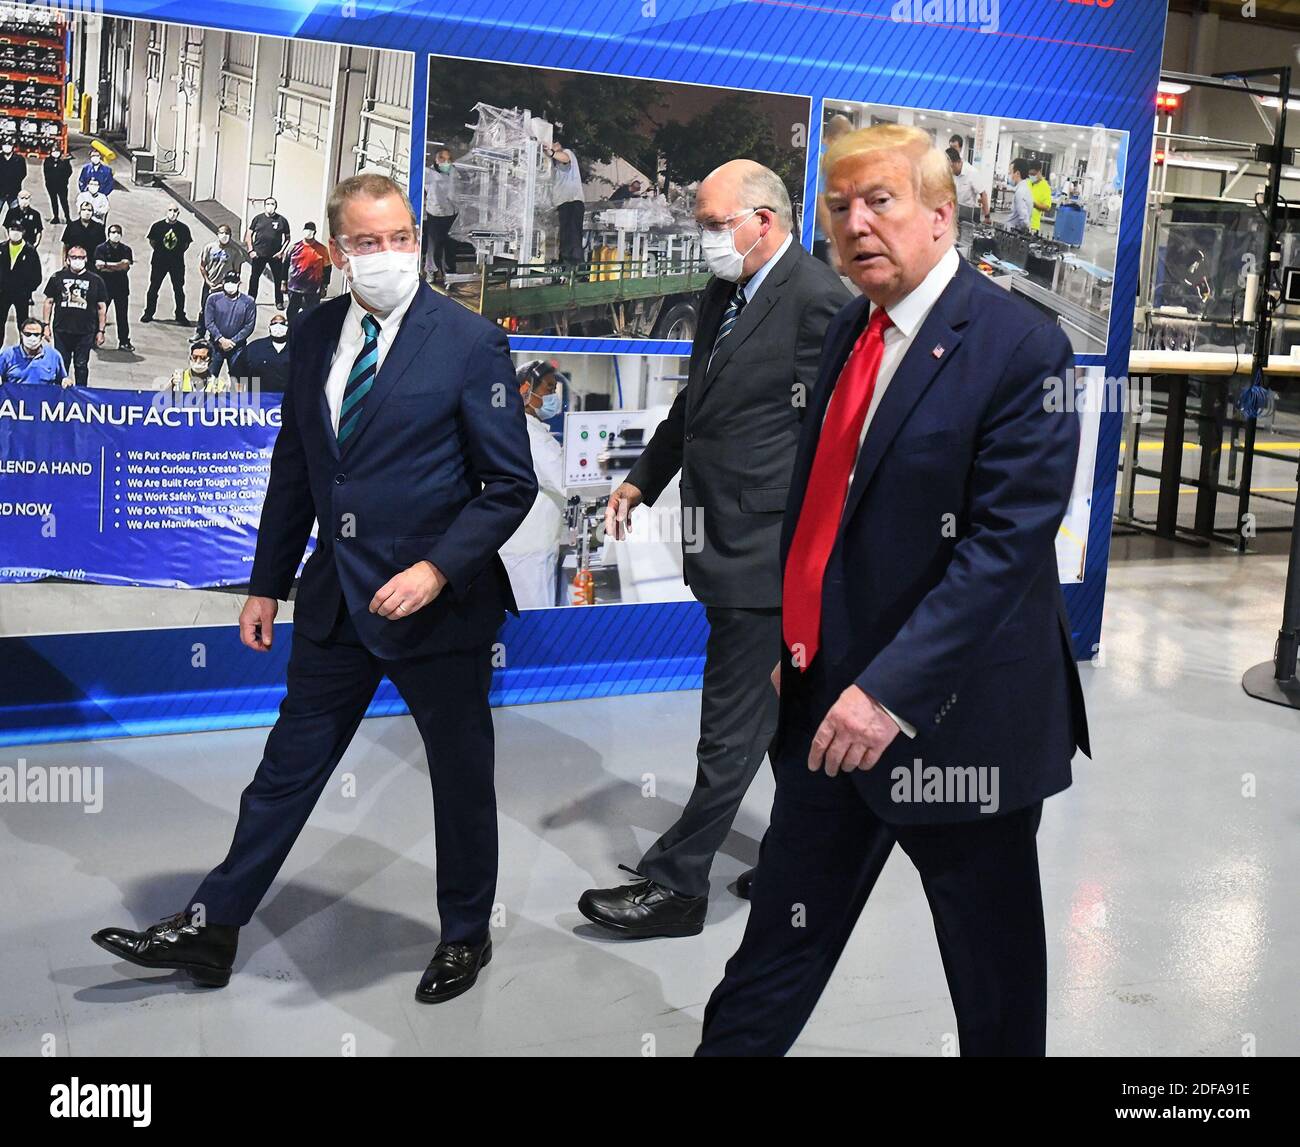 NO FILM, NO VIDEO, NO TV, NO DOCUMENTARY - President Donald Trump, right, and Executive Chairman of Ford Motor Company Bill Ford Jr., left, while touring Ford Motor Co.'s Rawsonville Components Plant in Ypsilanti, MI, USA on Thursday, May 21, 2020. Trump says he wore a mask in a 'back area' during a factory tour in Michigan, but removed it before facing the cameras. He told reporters he took off the facial covering at the Ford car plant because he 'didn't want to give the press the pleasure of seeing it', and he was about to make a speech. Photo by Daniel Mears/The Detroit News/TNS/ABACAPRESS. Stock Photo